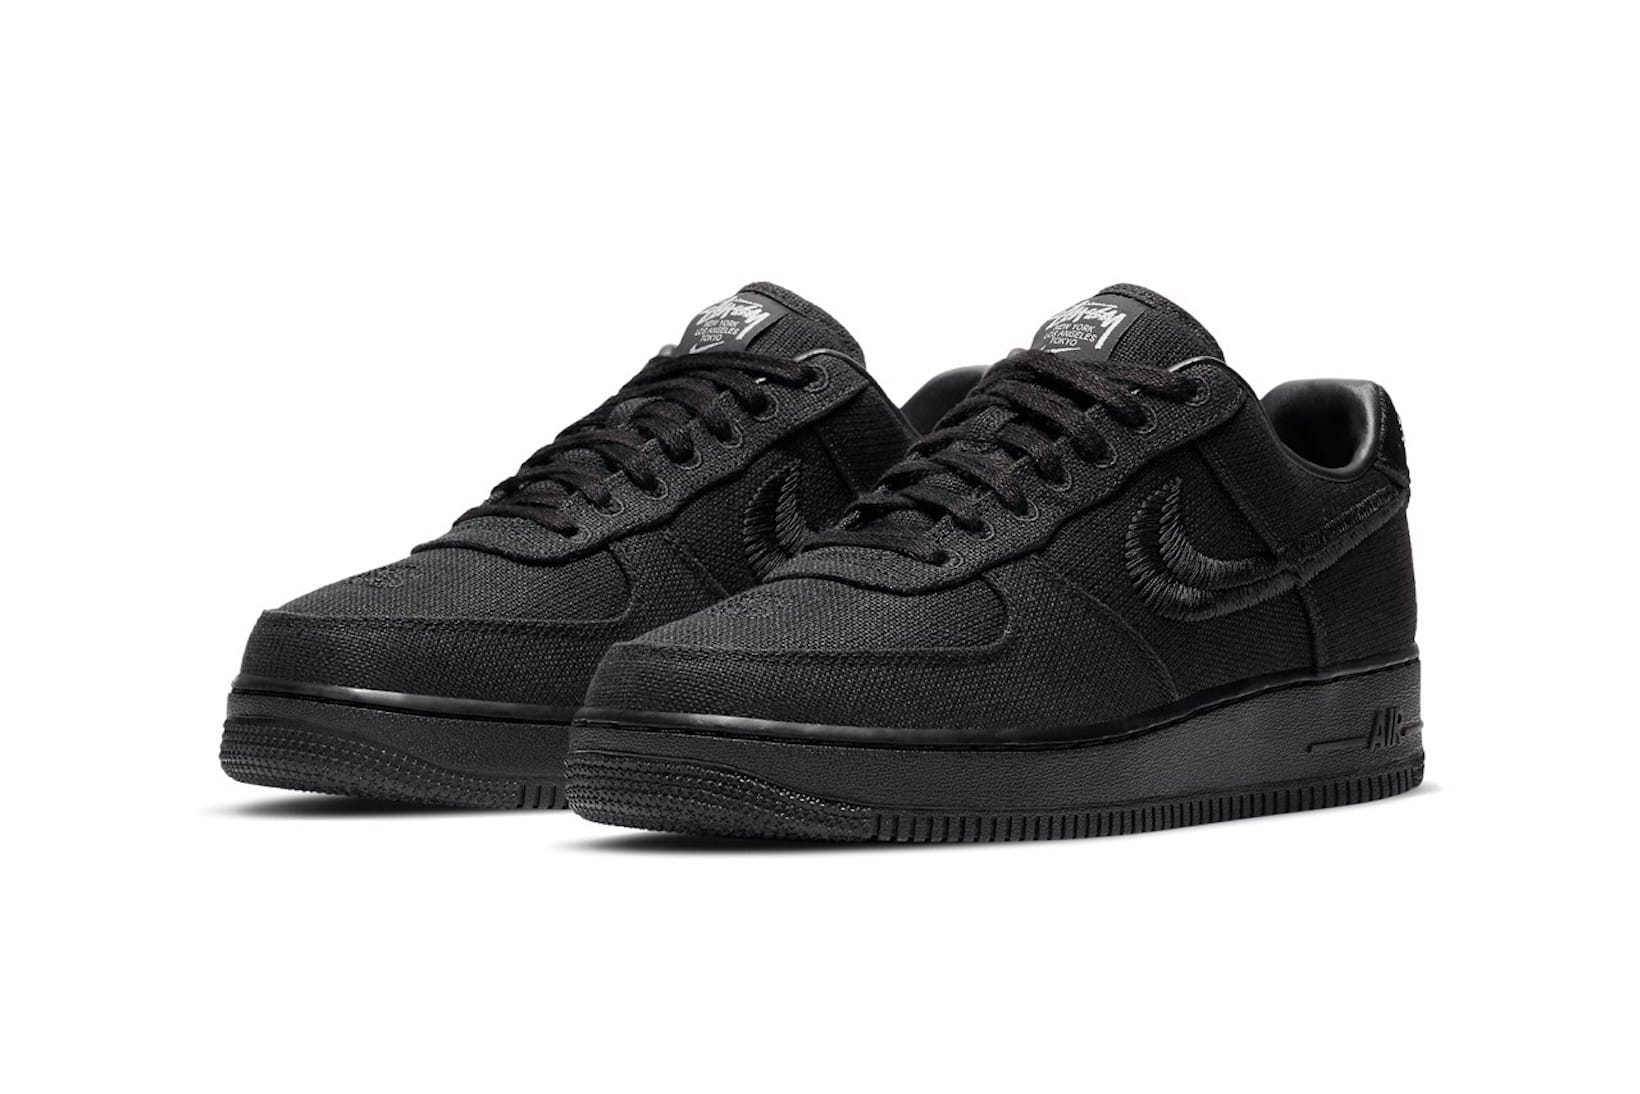 stussy air force 1 release date